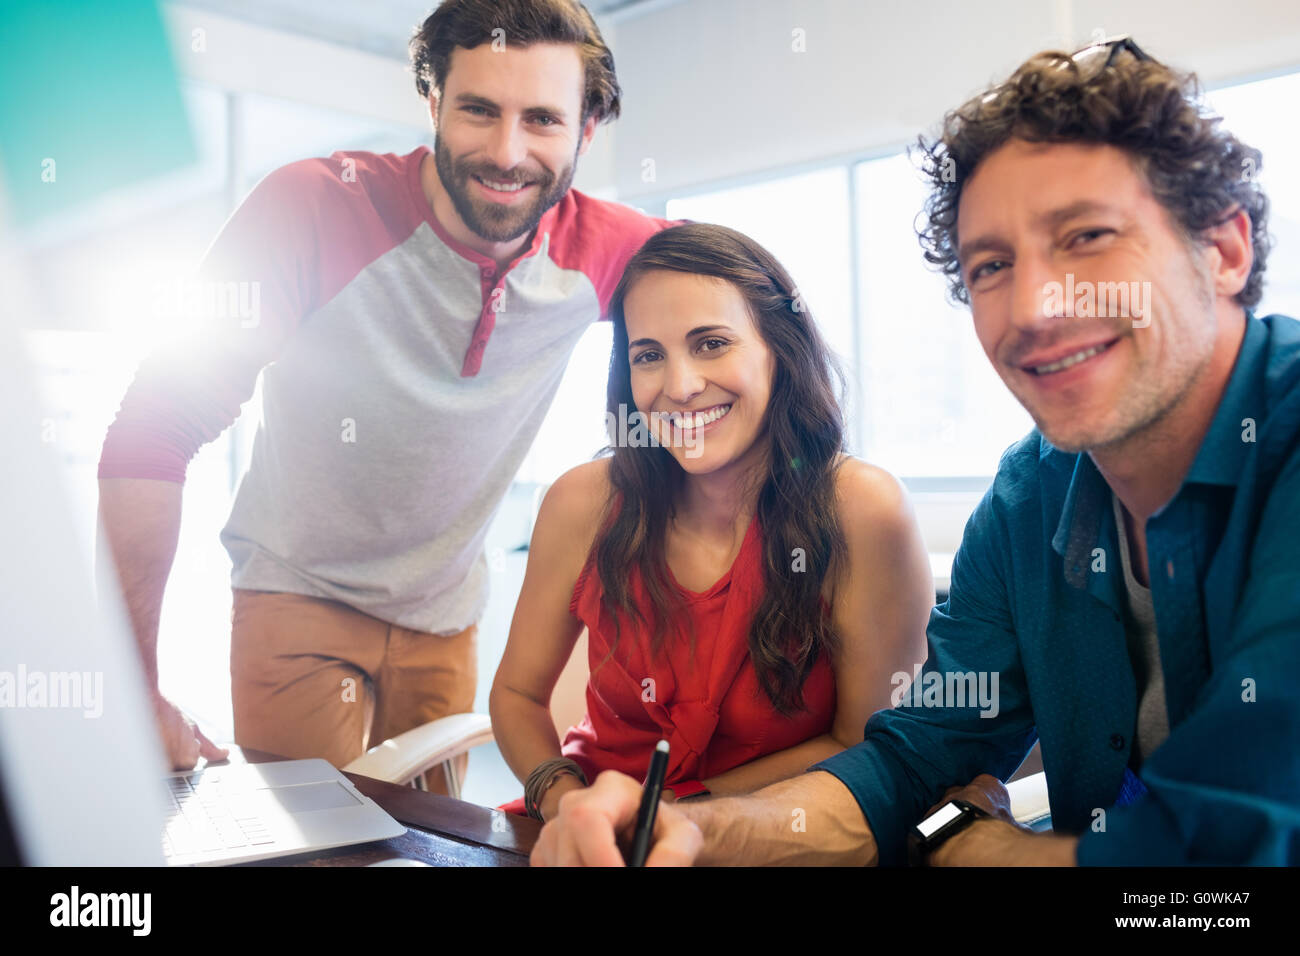 Colleagues using technology Stock Photo